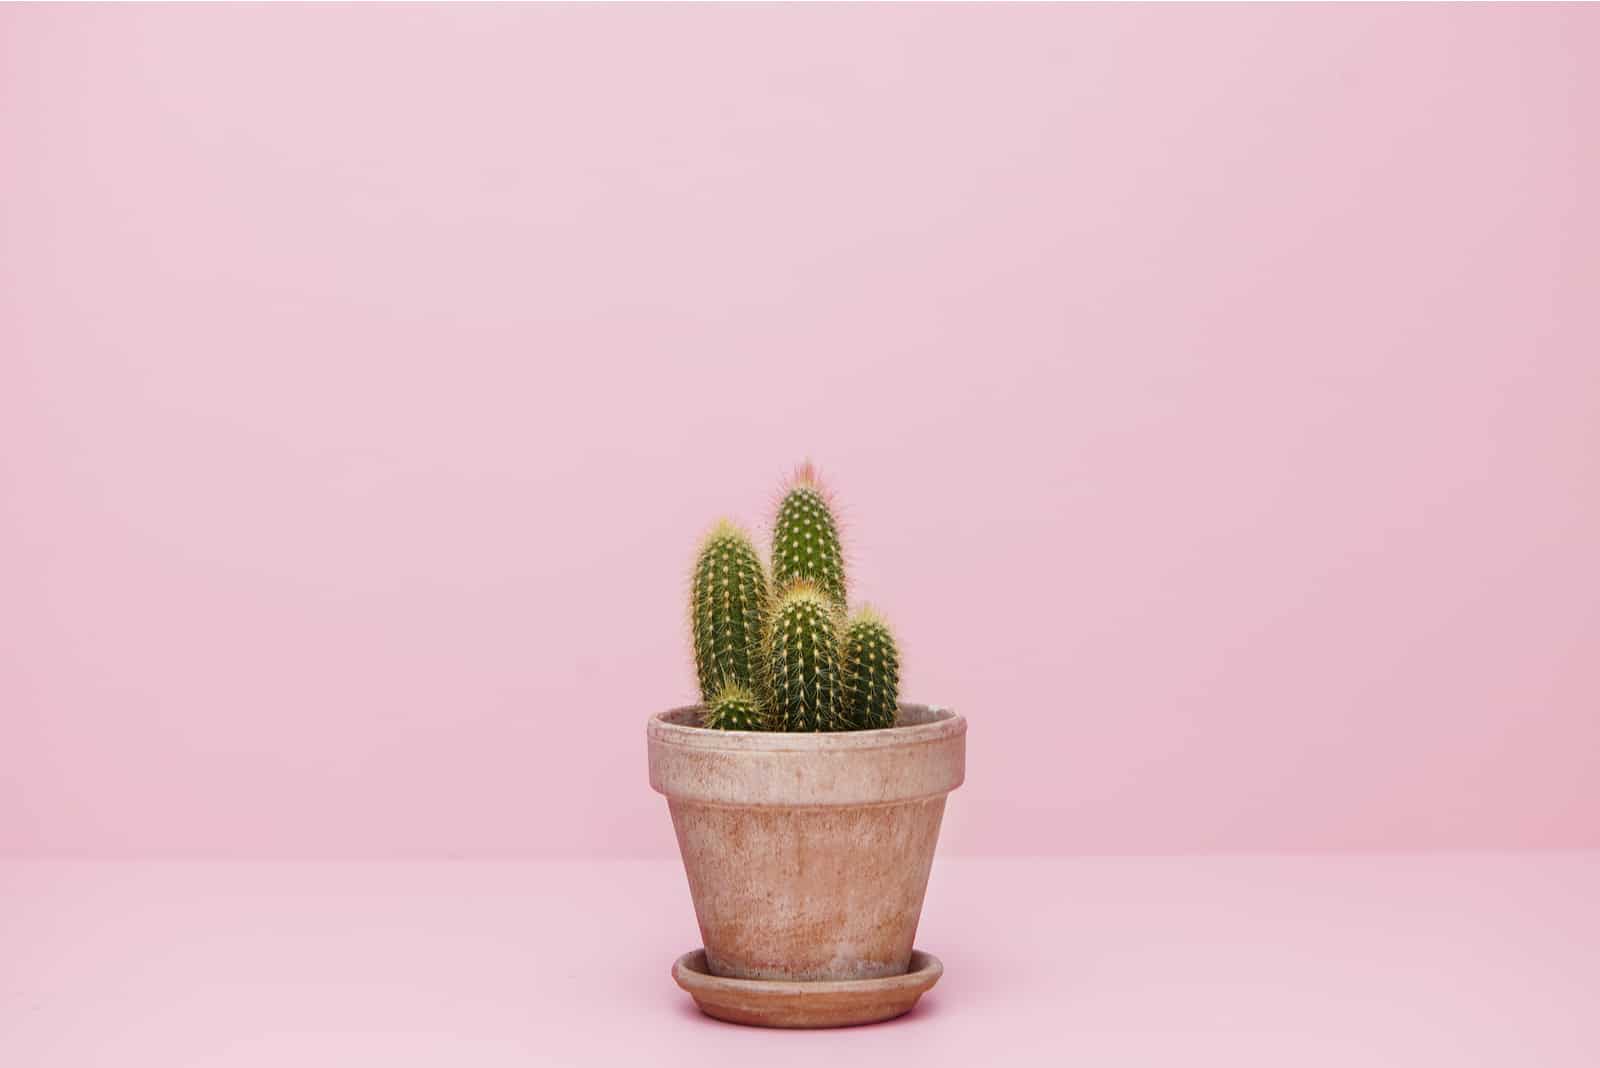 Small cactus in a flowerpot on a pink background